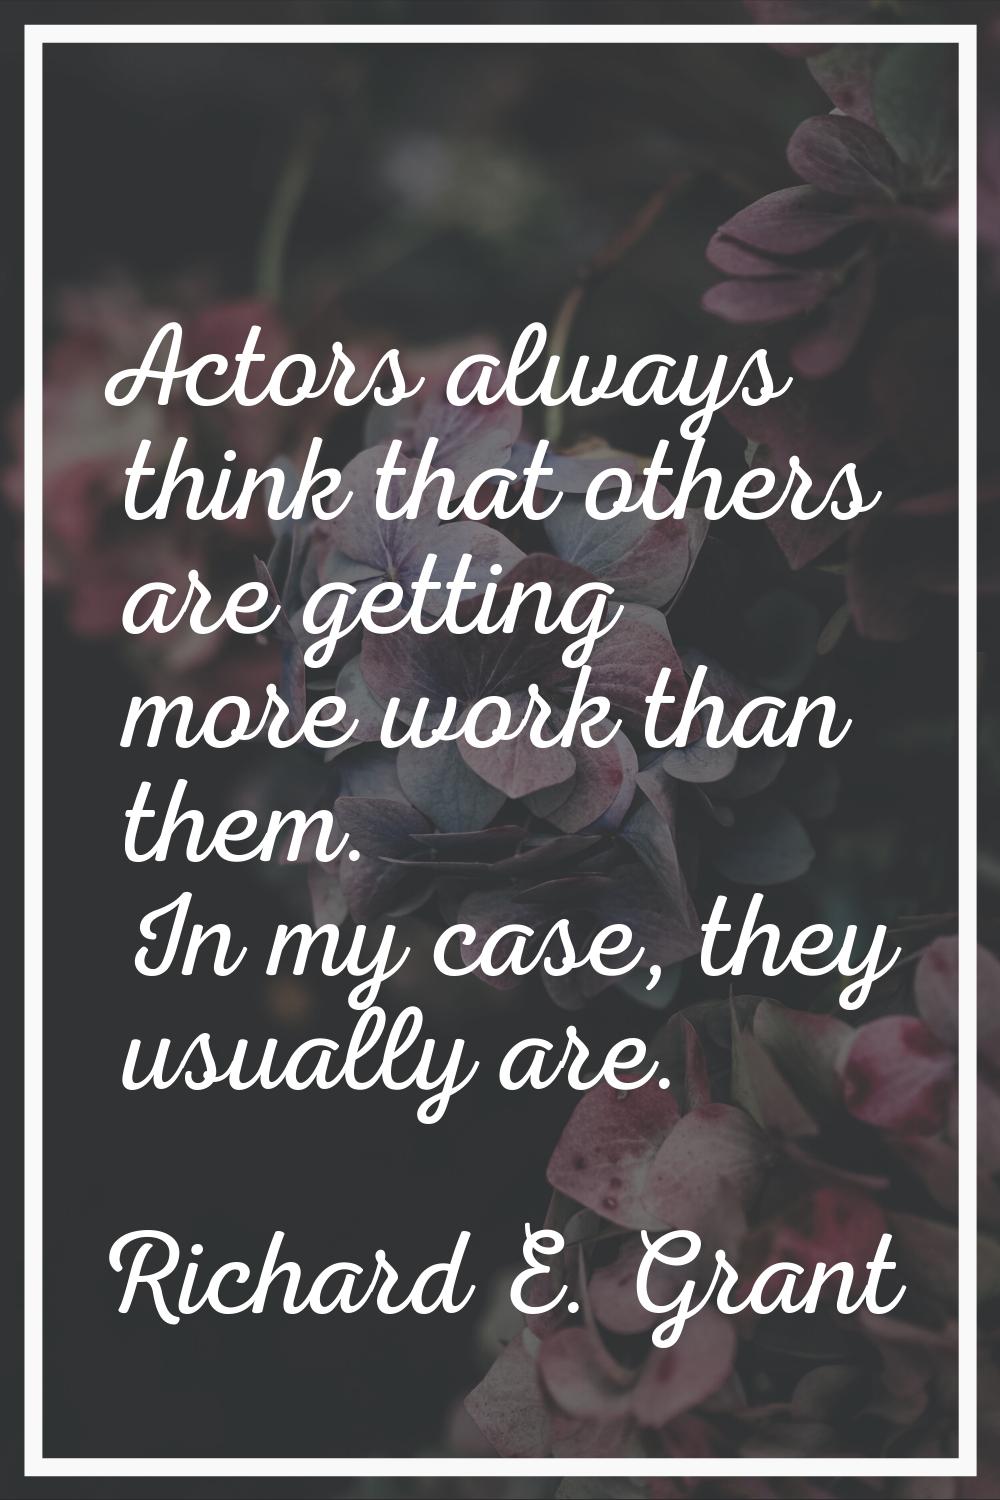 Actors always think that others are getting more work than them. In my case, they usually are.